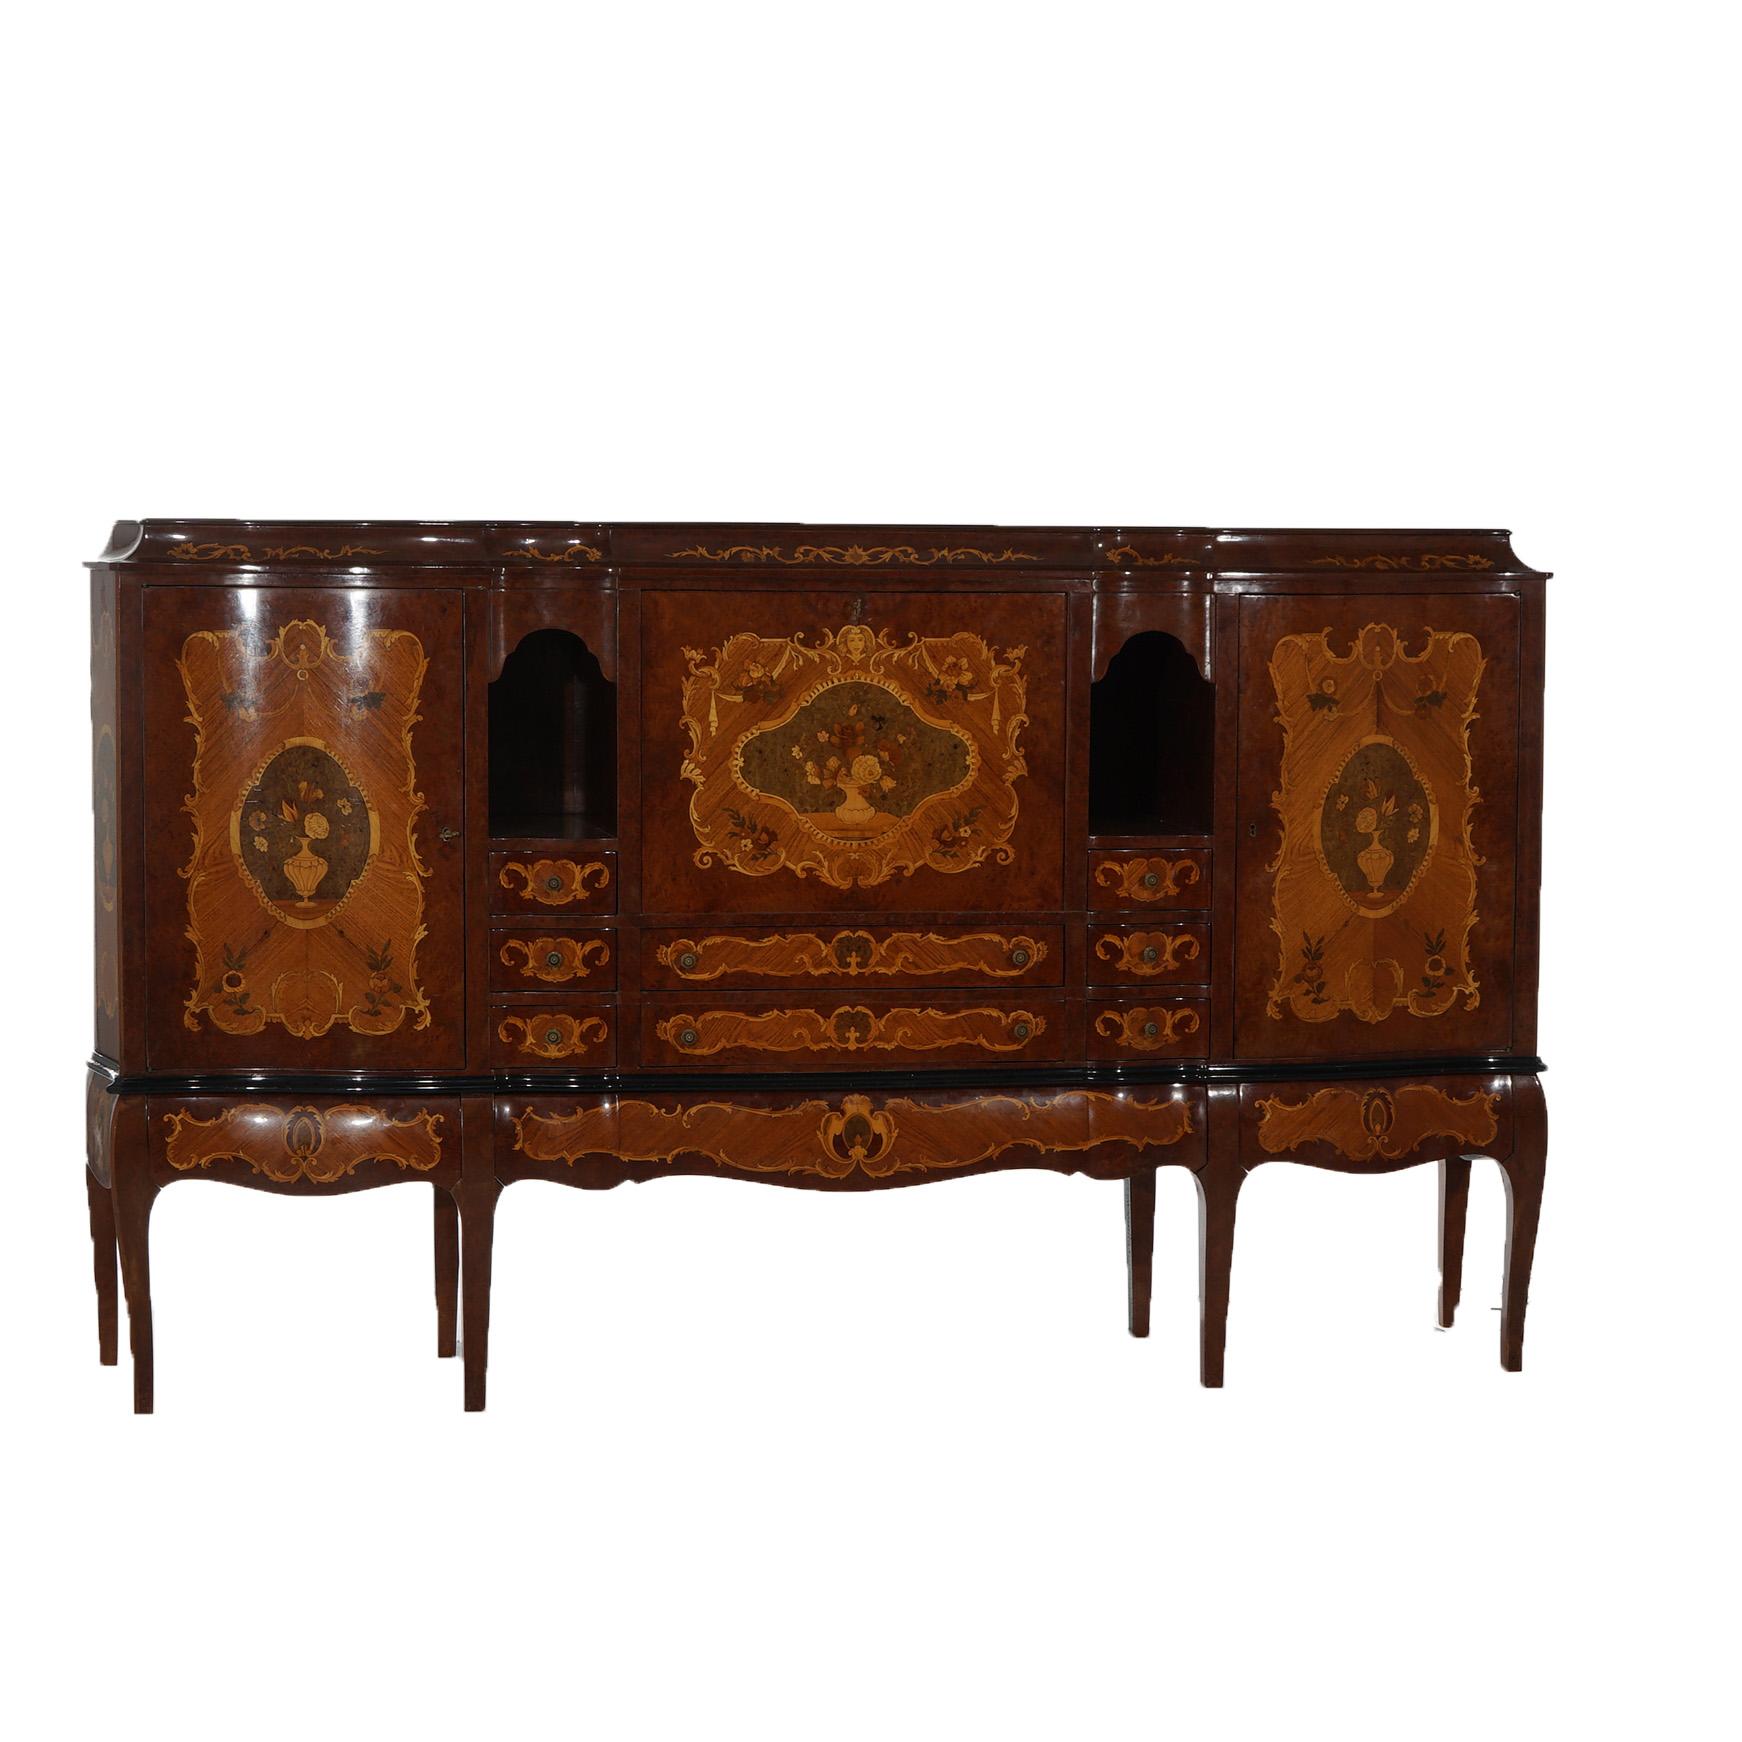 Antique French Kingwood Satinwood & Burlwood Marquetry Inlaid Sideboard C1930 For Sale 2